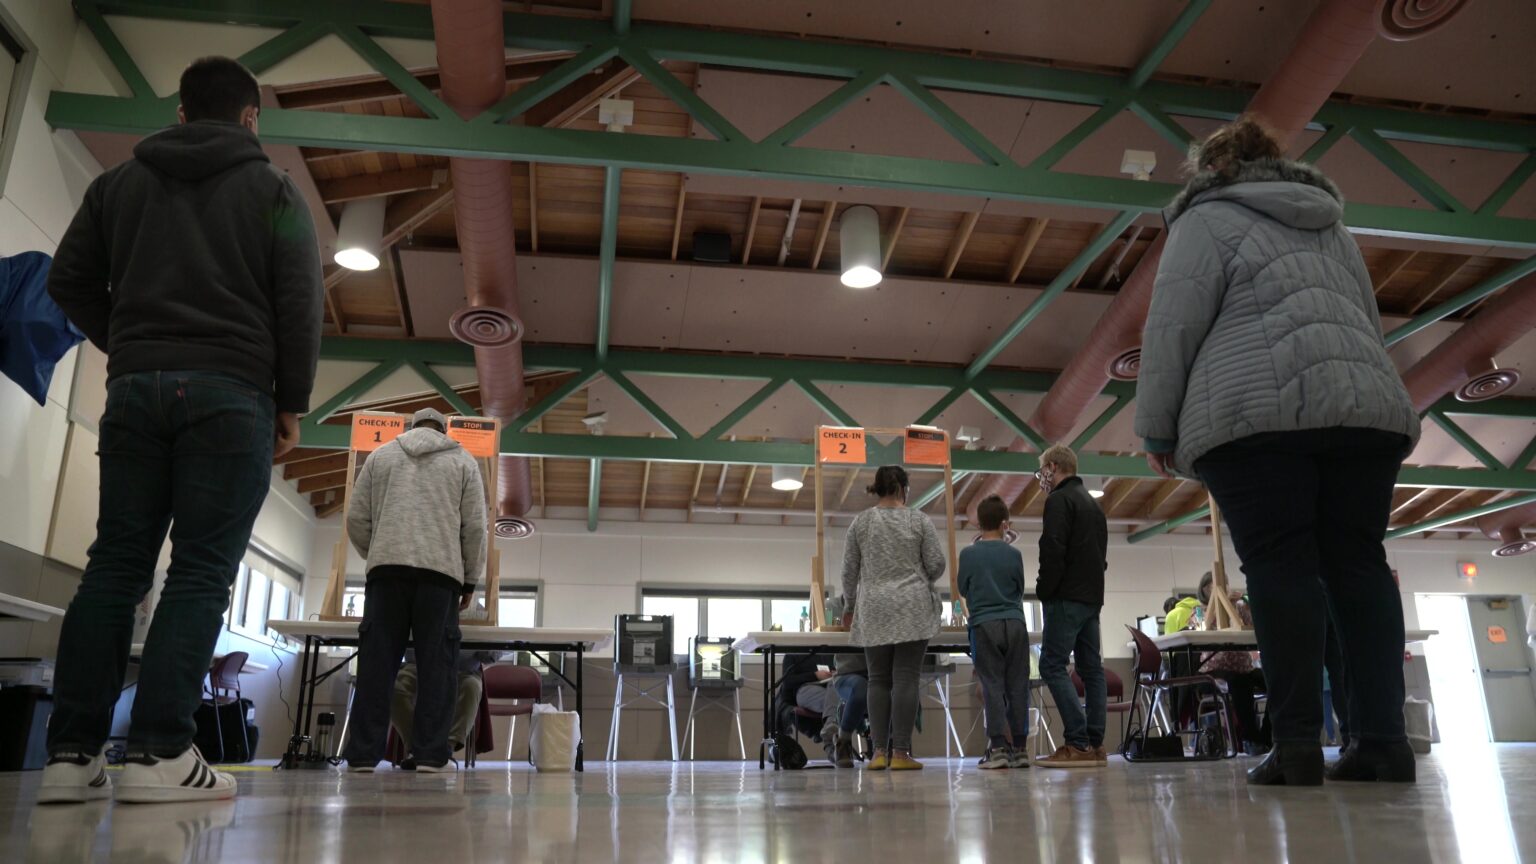 Voters stand in lines behind tables inside a large room.